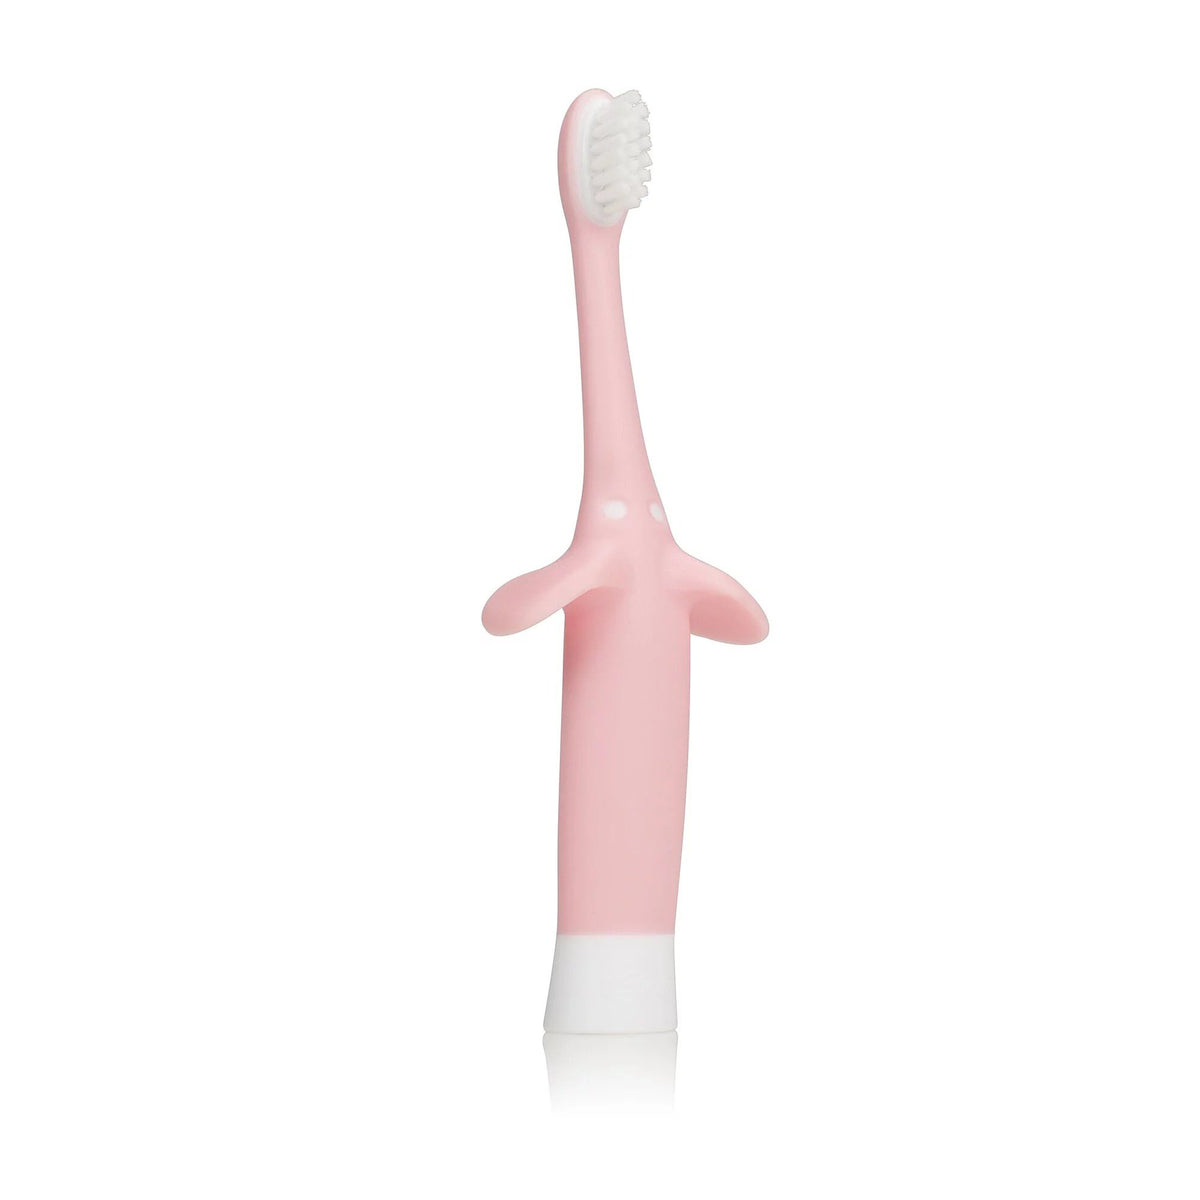 dr-browns-super-soft-training-toothbrush- (2)